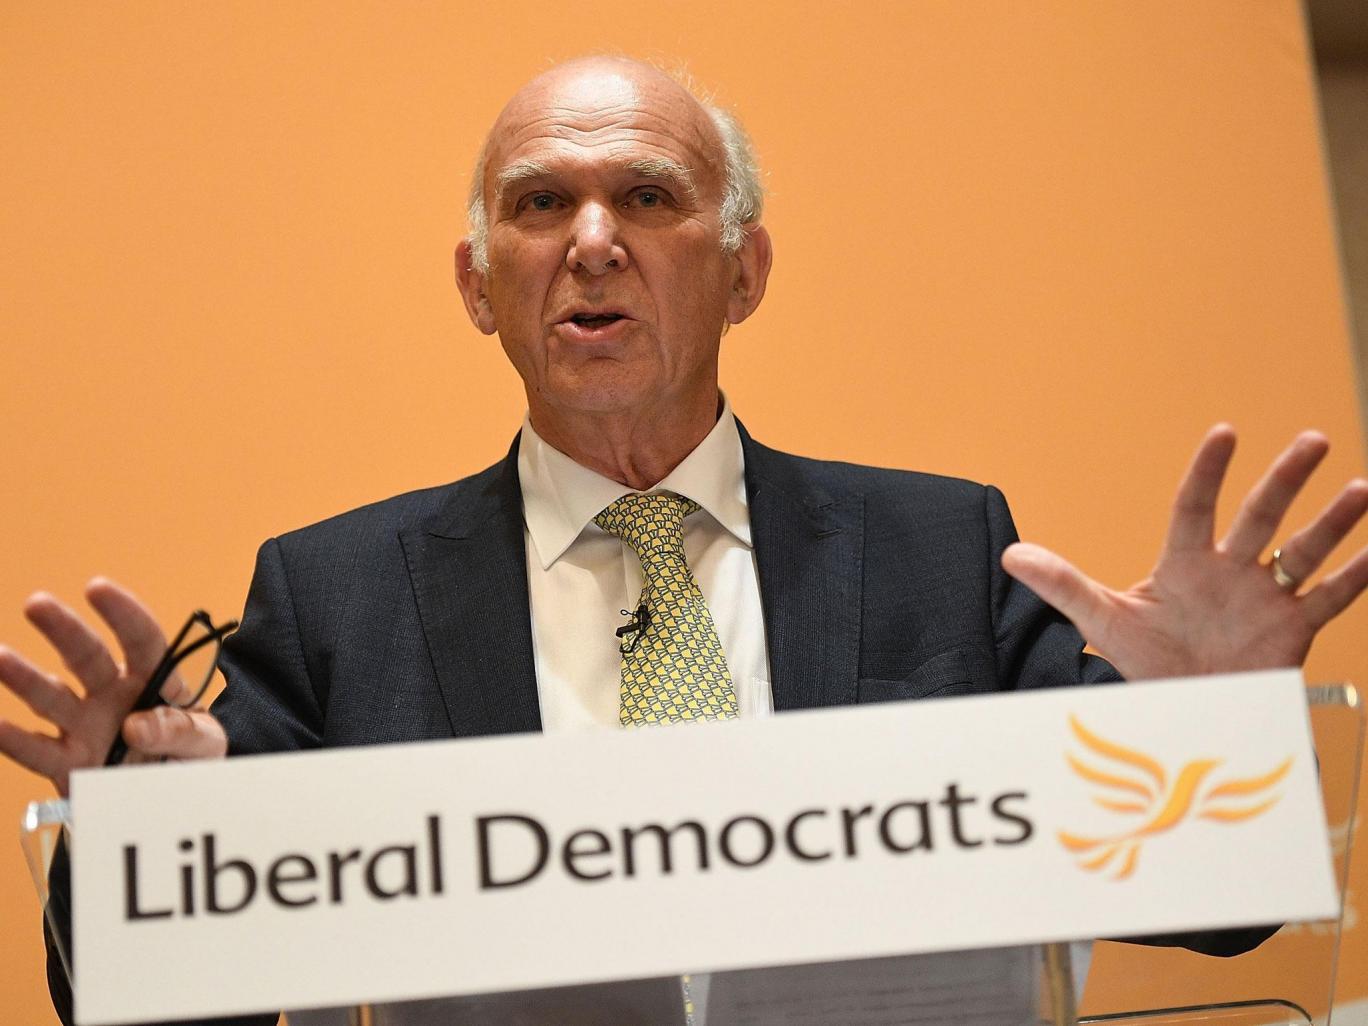 The Liberal Democrats must find a new message to maintain relevance